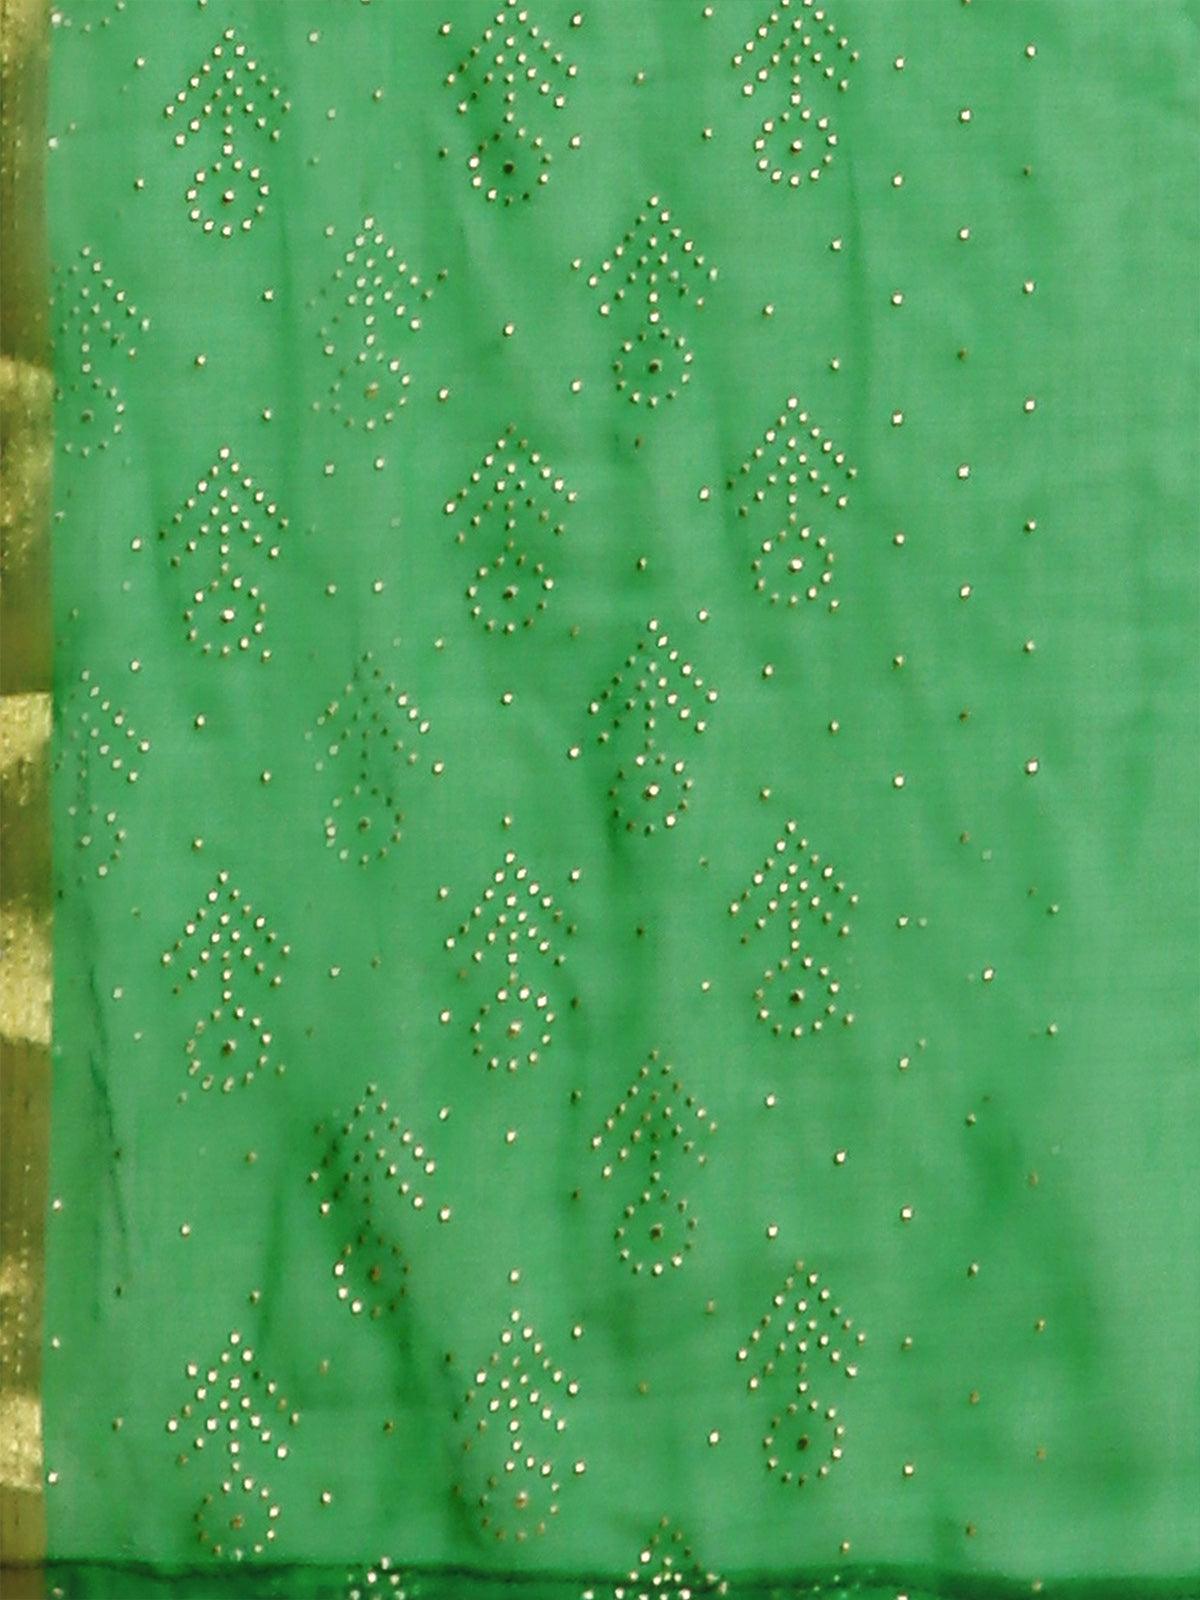 Women's Green Chiffon Woven Border Saree With Unstitched Blouse - Odette